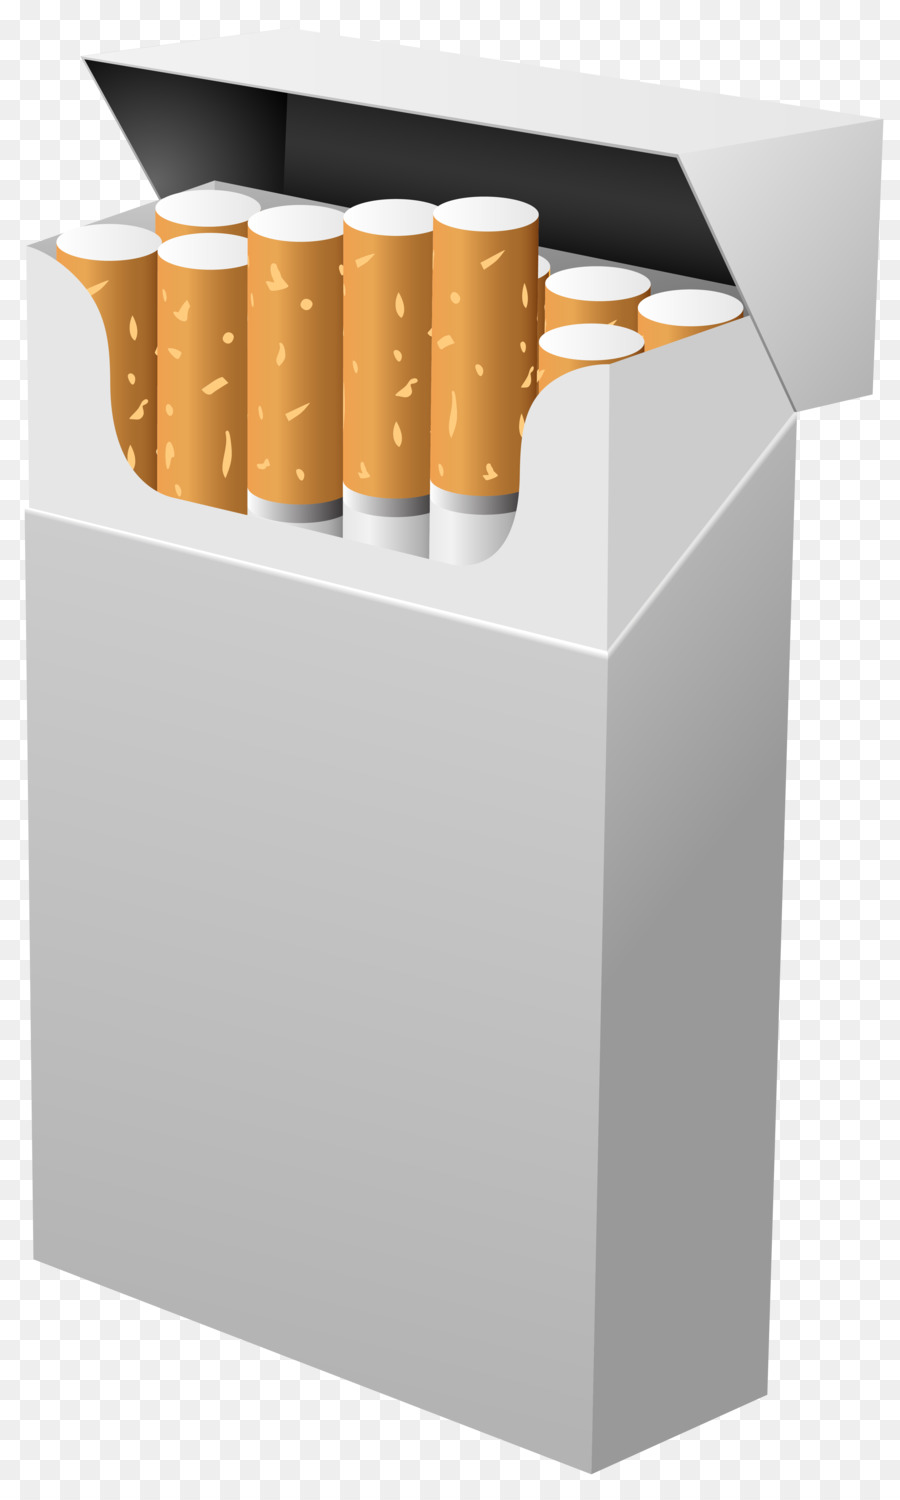 Who Framework Convention On Tobacco Control Plain Tobacco Packaging Cigarette Pack Smoking   Cigarette - Cigarette Pack, Transparent background PNG HD thumbnail